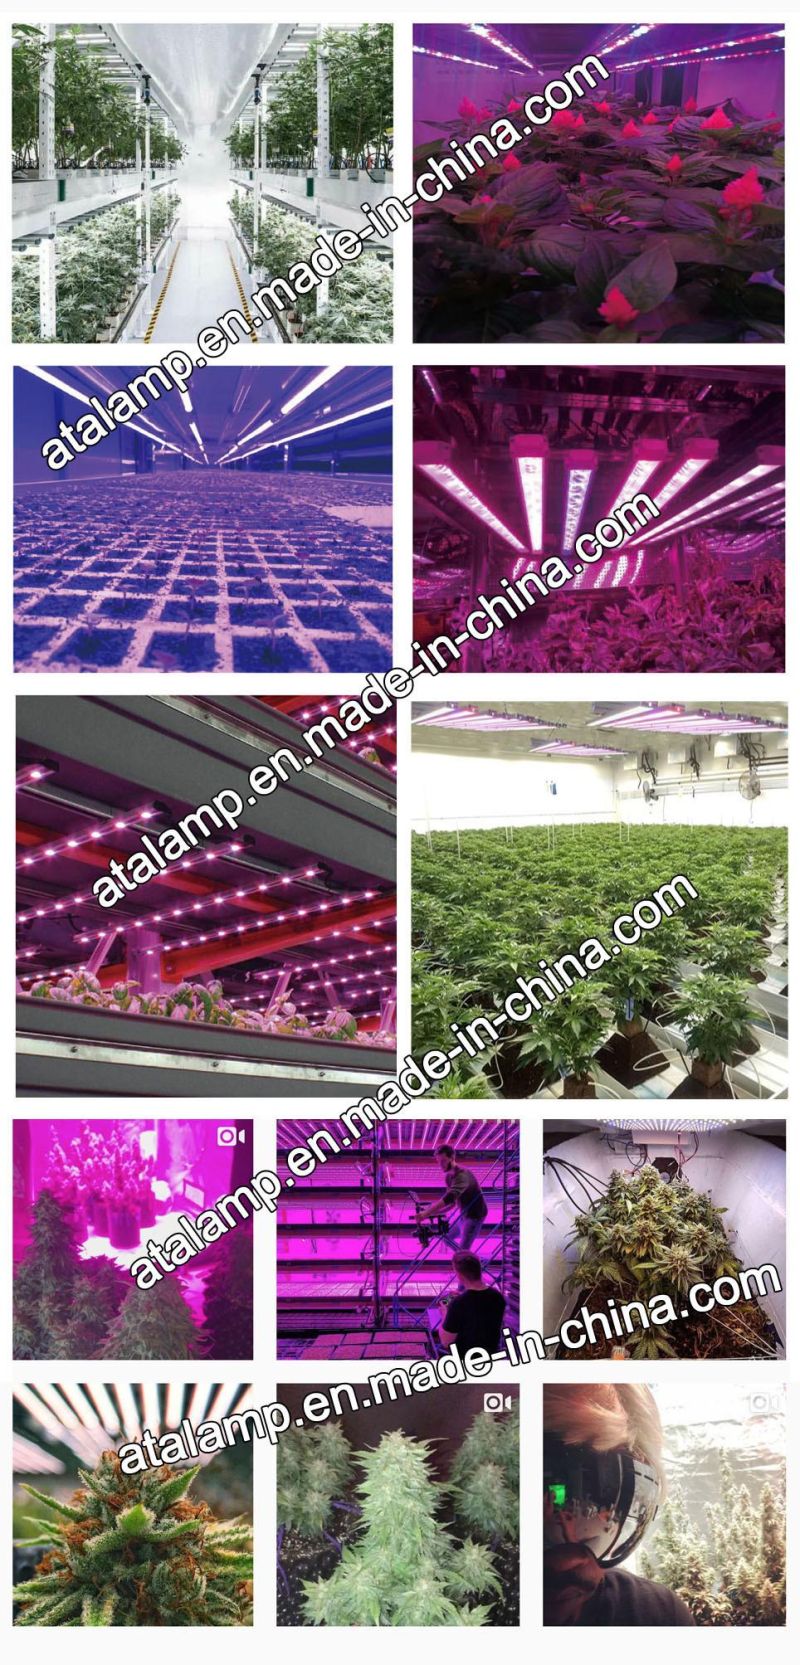 Amazon Top Product Board Samsung Lm301b Full Spectrum LED Grow Light for Indoor Garden